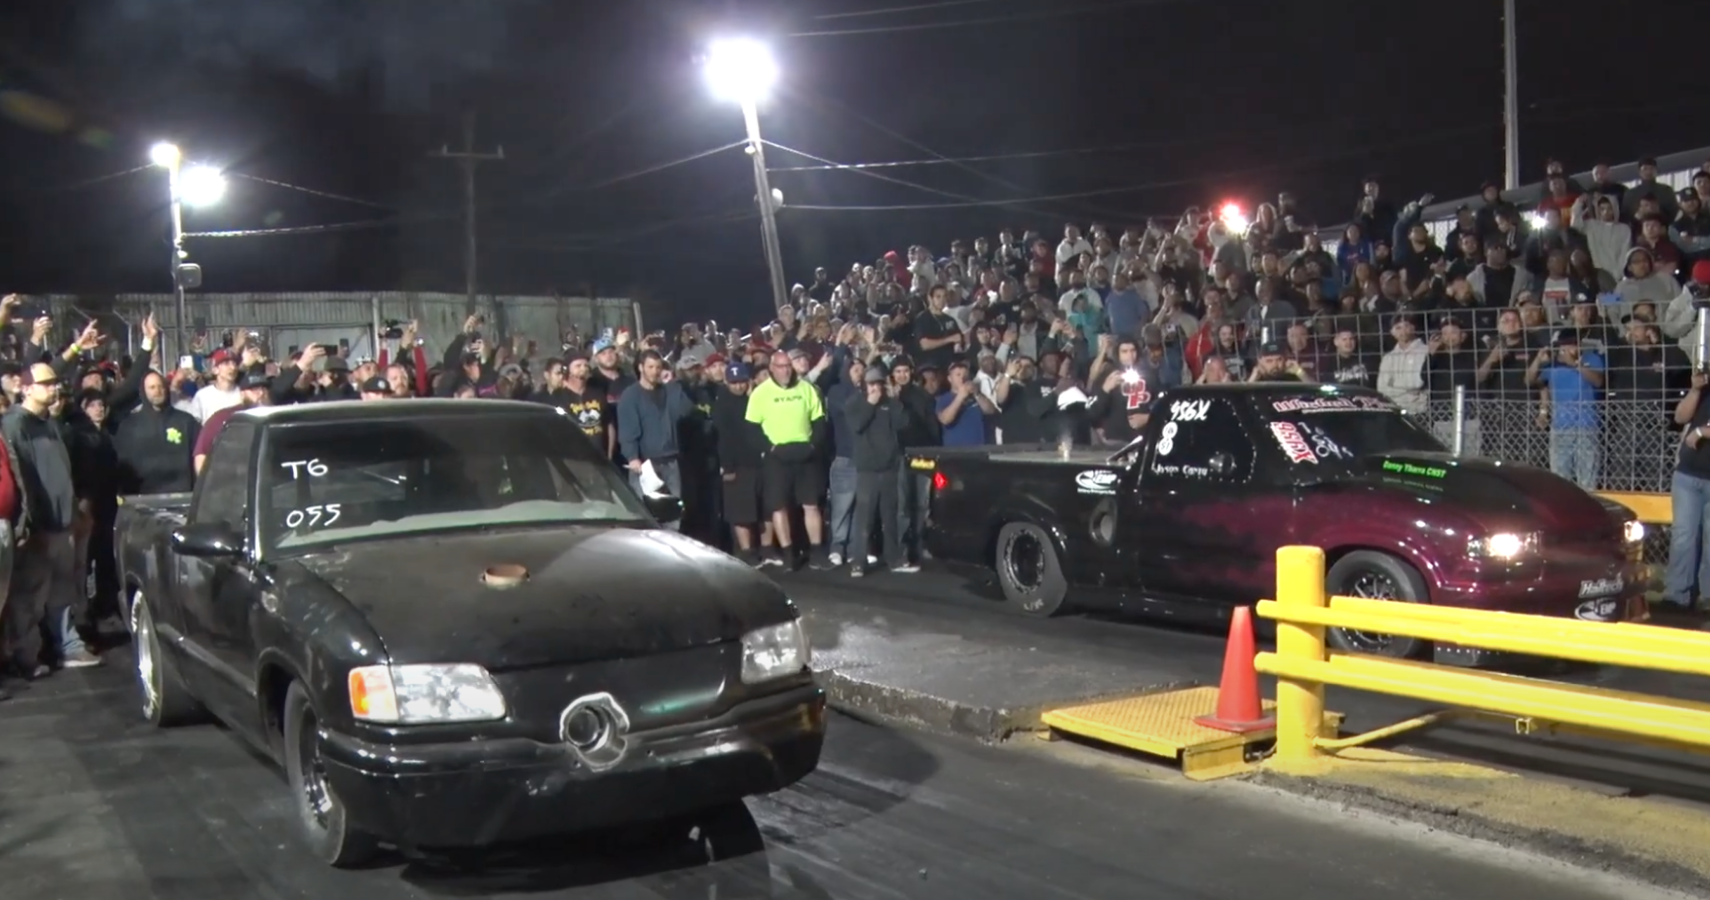 A black Chevrolet S10 lines up to race at the drag strip